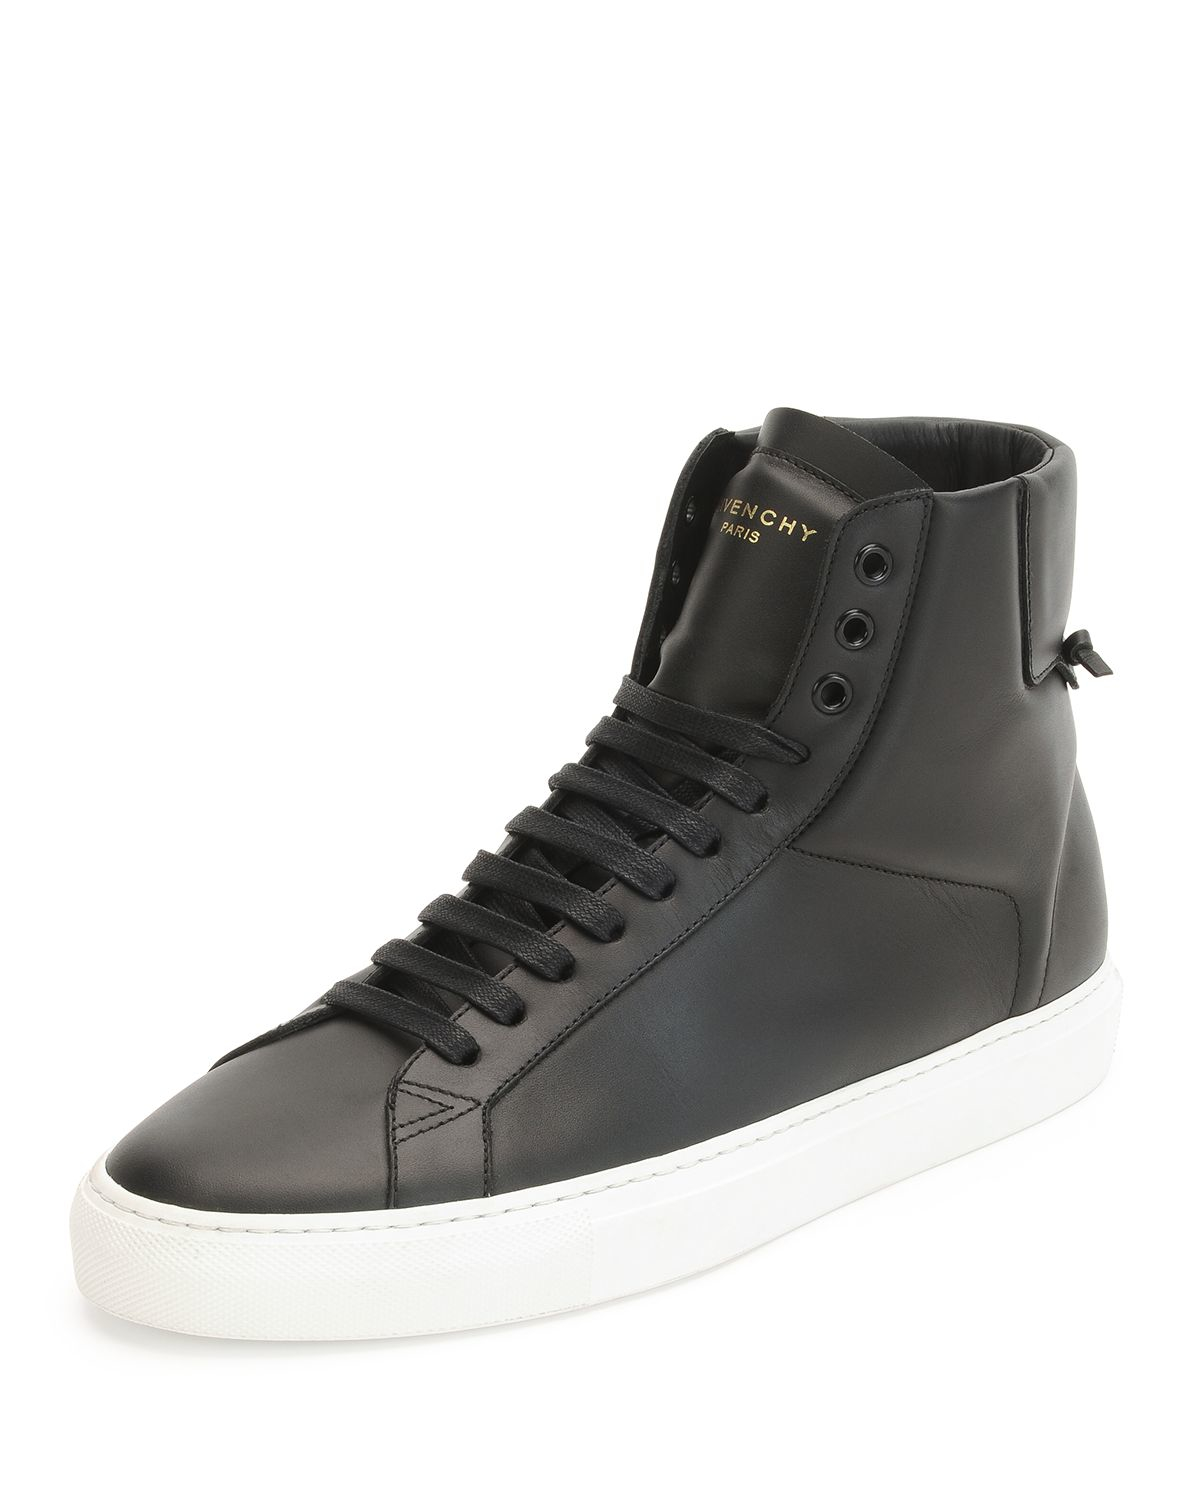 Givenchy Urban Street High-Top Sneakers in Black for Men | Lyst